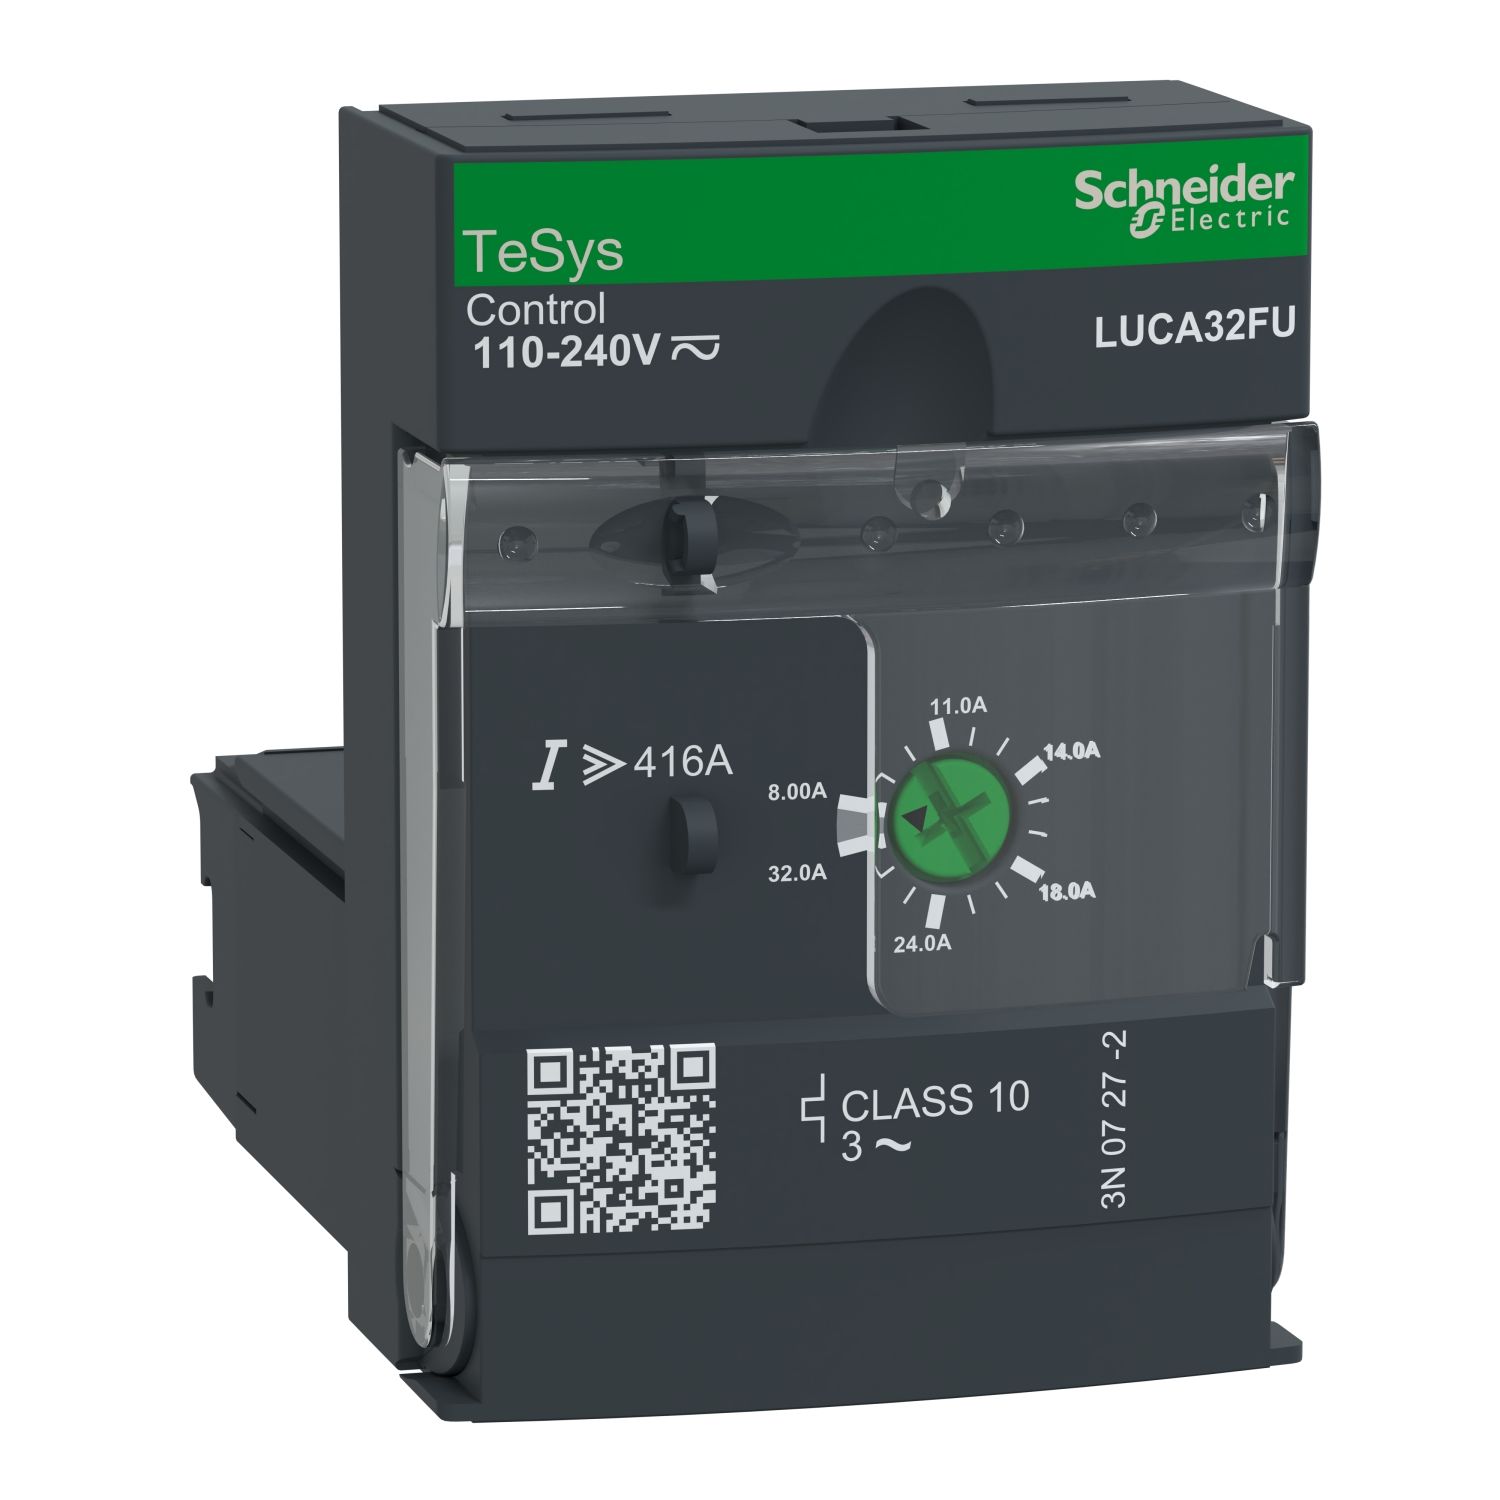 LUCA32FU Standard control unit, TeSys U, 8-32A, 3P motors, thermal magnetic protection, class 10, coil 110-240V AC/DC